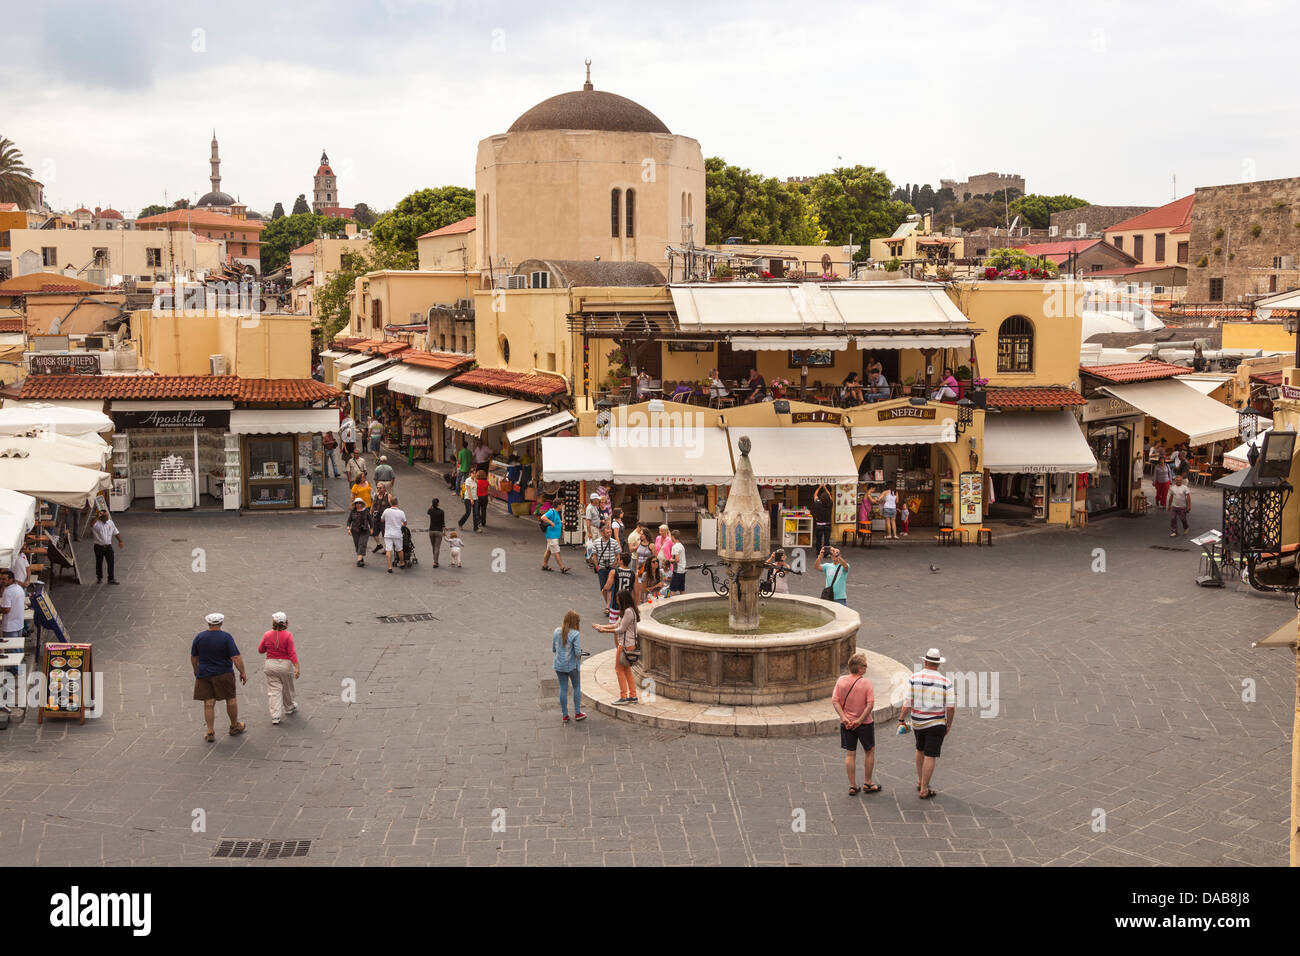 Ippokratous Square in the old town, Rhodes, Greece Stock Photo